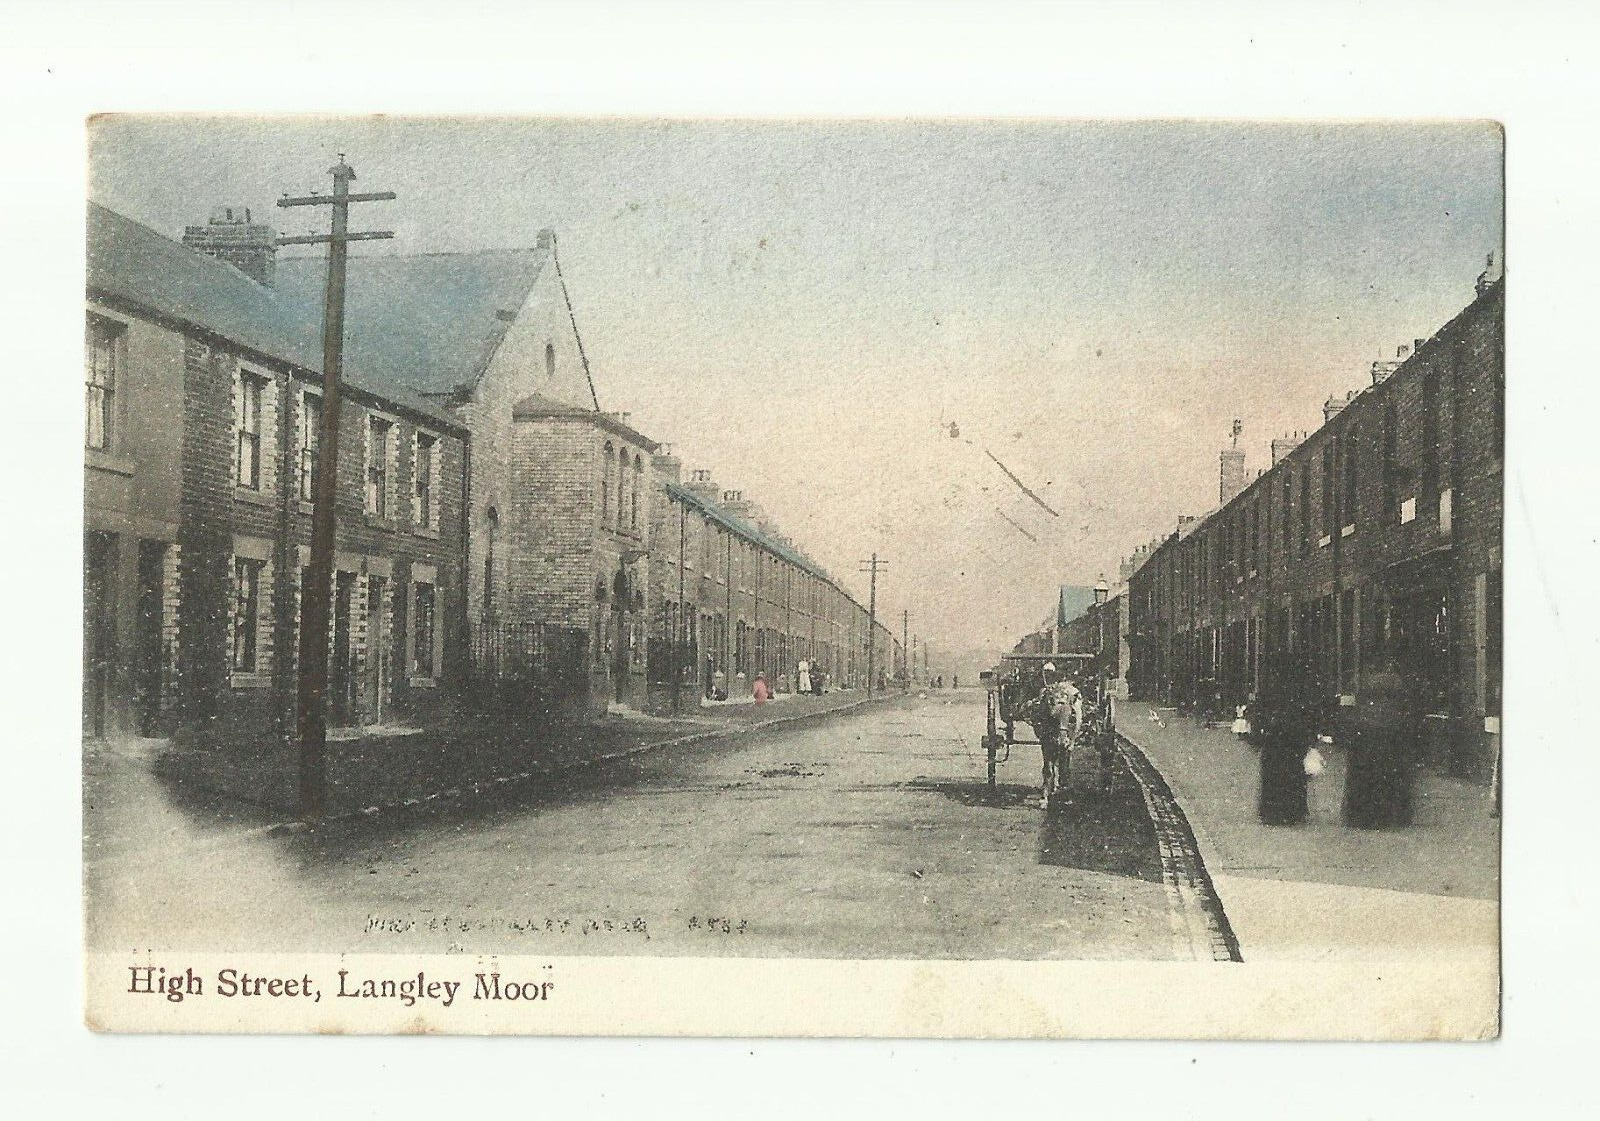 House Clearance - High Street Langley Moor. 1905. nr. Durham, Meadowfield, Brandon. To Frosterley